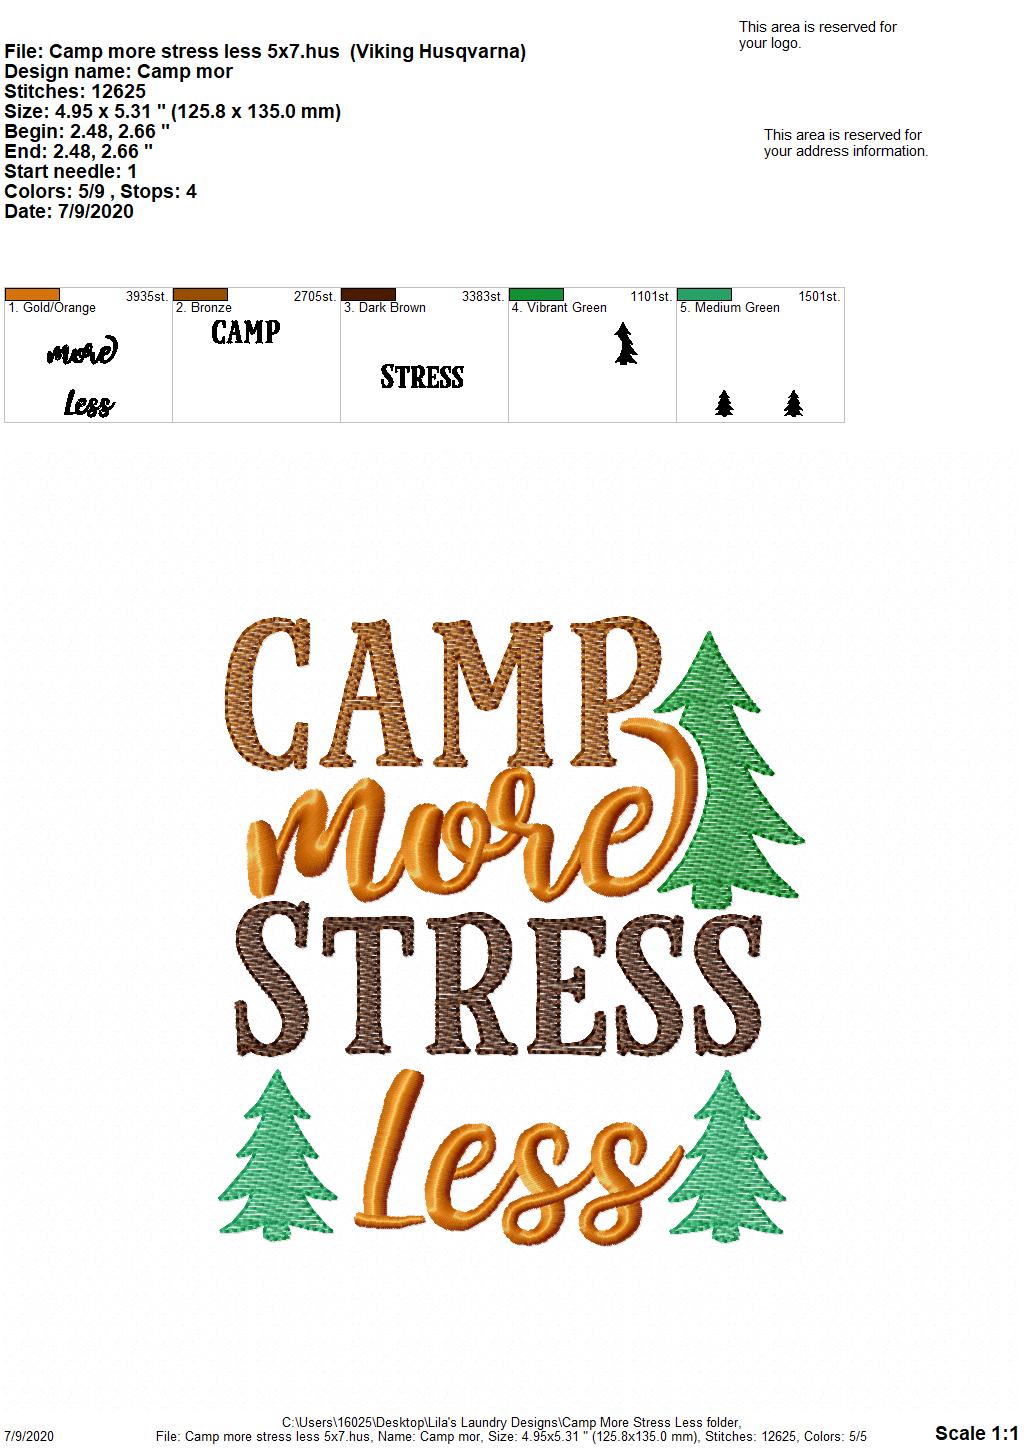 Camp More Stress Less - 2 Sizes - Digital Embroidery Design